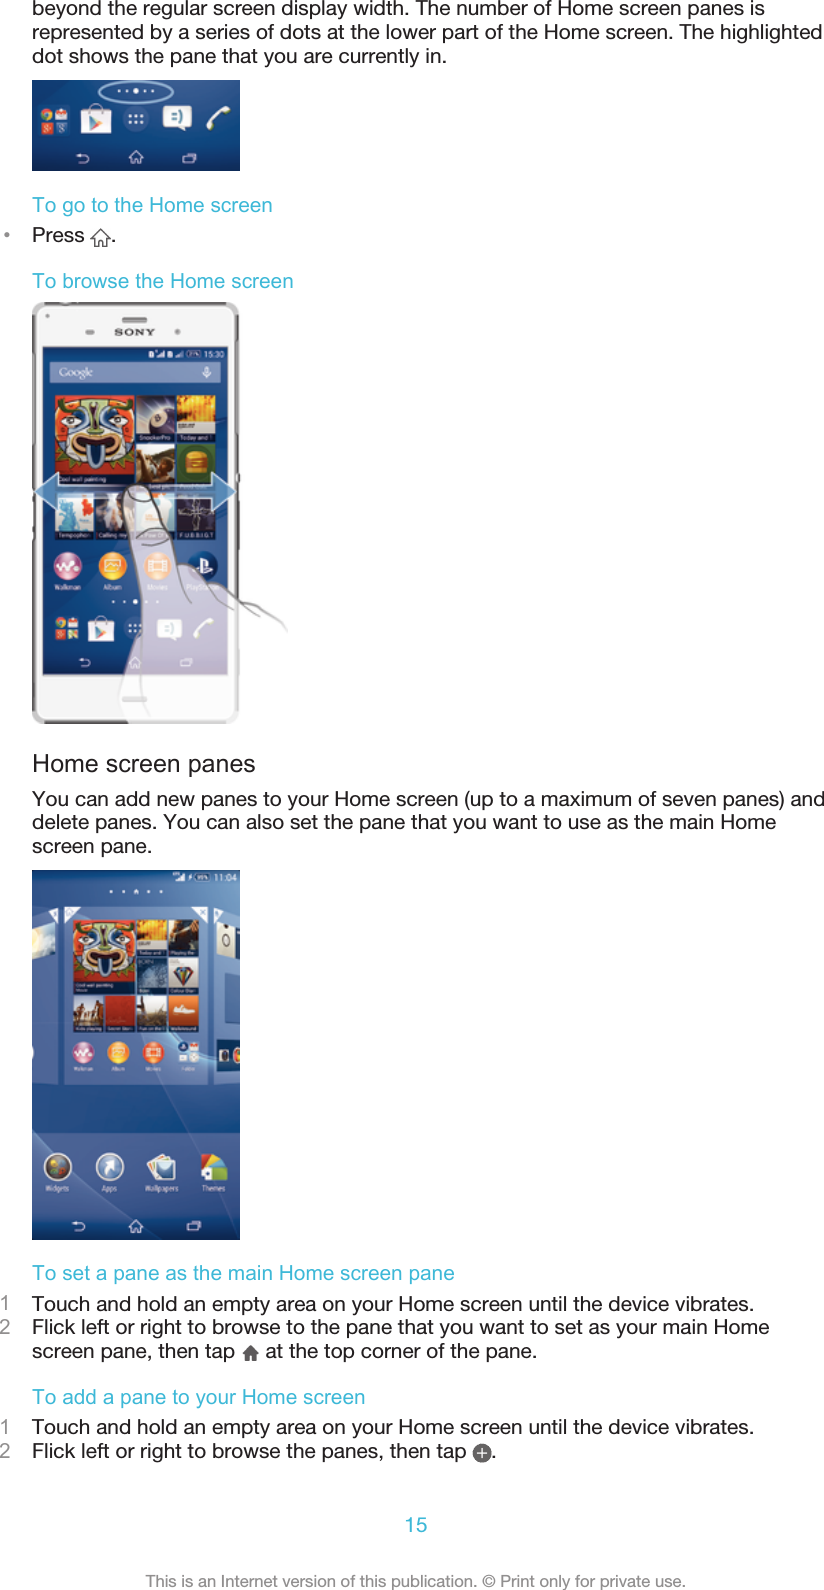 beyond the regular screen display width. The number of Home screen panes isrepresented by a series of dots at the lower part of the Home screen. The highlighteddot shows the pane that you are currently in.To go to the Home screen•Press  .To browse the Home screenHome screen panesYou can add new panes to your Home screen (up to a maximum of seven panes) anddelete panes. You can also set the pane that you want to use as the main Homescreen pane.To set a pane as the main Home screen pane1Touch and hold an empty area on your Home screen until the device vibrates.2Flick left or right to browse to the pane that you want to set as your main Homescreen pane, then tap   at the top corner of the pane.To add a pane to your Home screen1Touch and hold an empty area on your Home screen until the device vibrates.2Flick left or right to browse the panes, then tap  .15This is an Internet version of this publication. © Print only for private use.